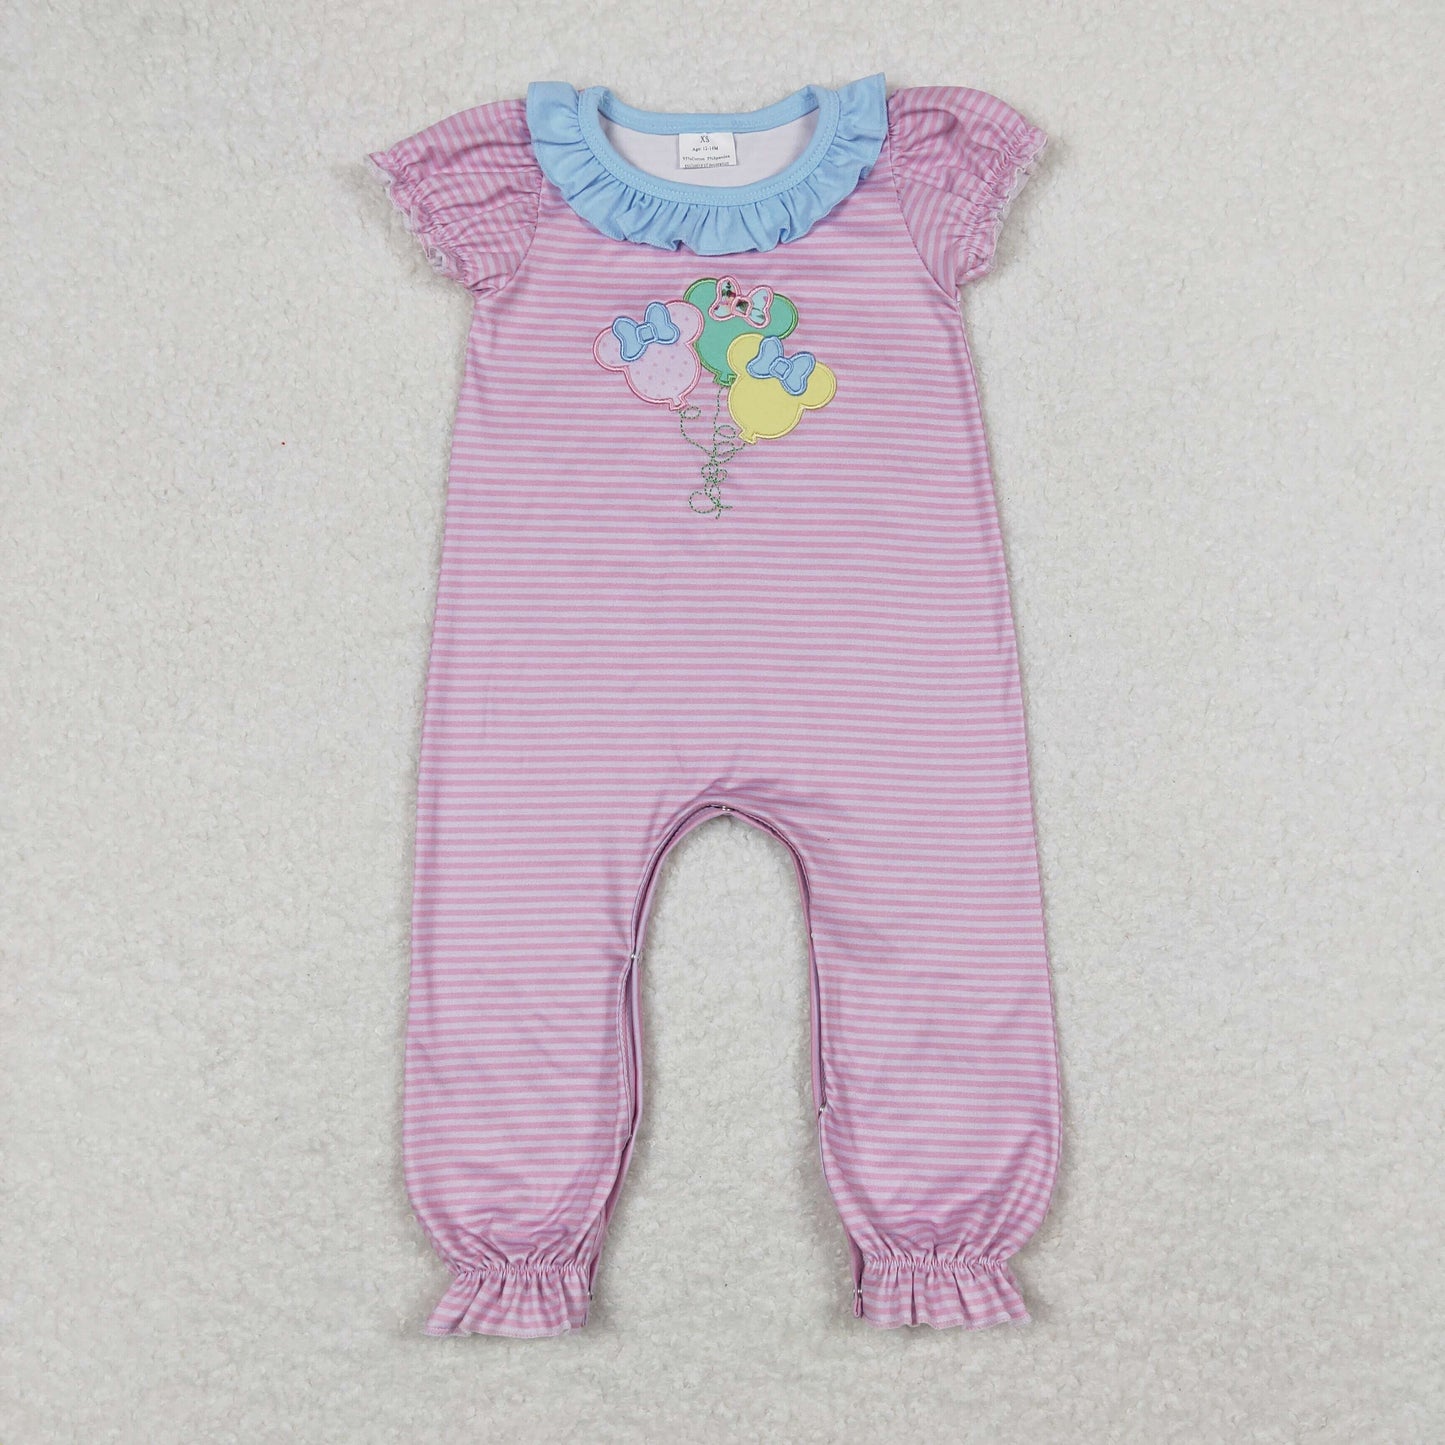 girl cartoon balloon embroidery romper baby clothes